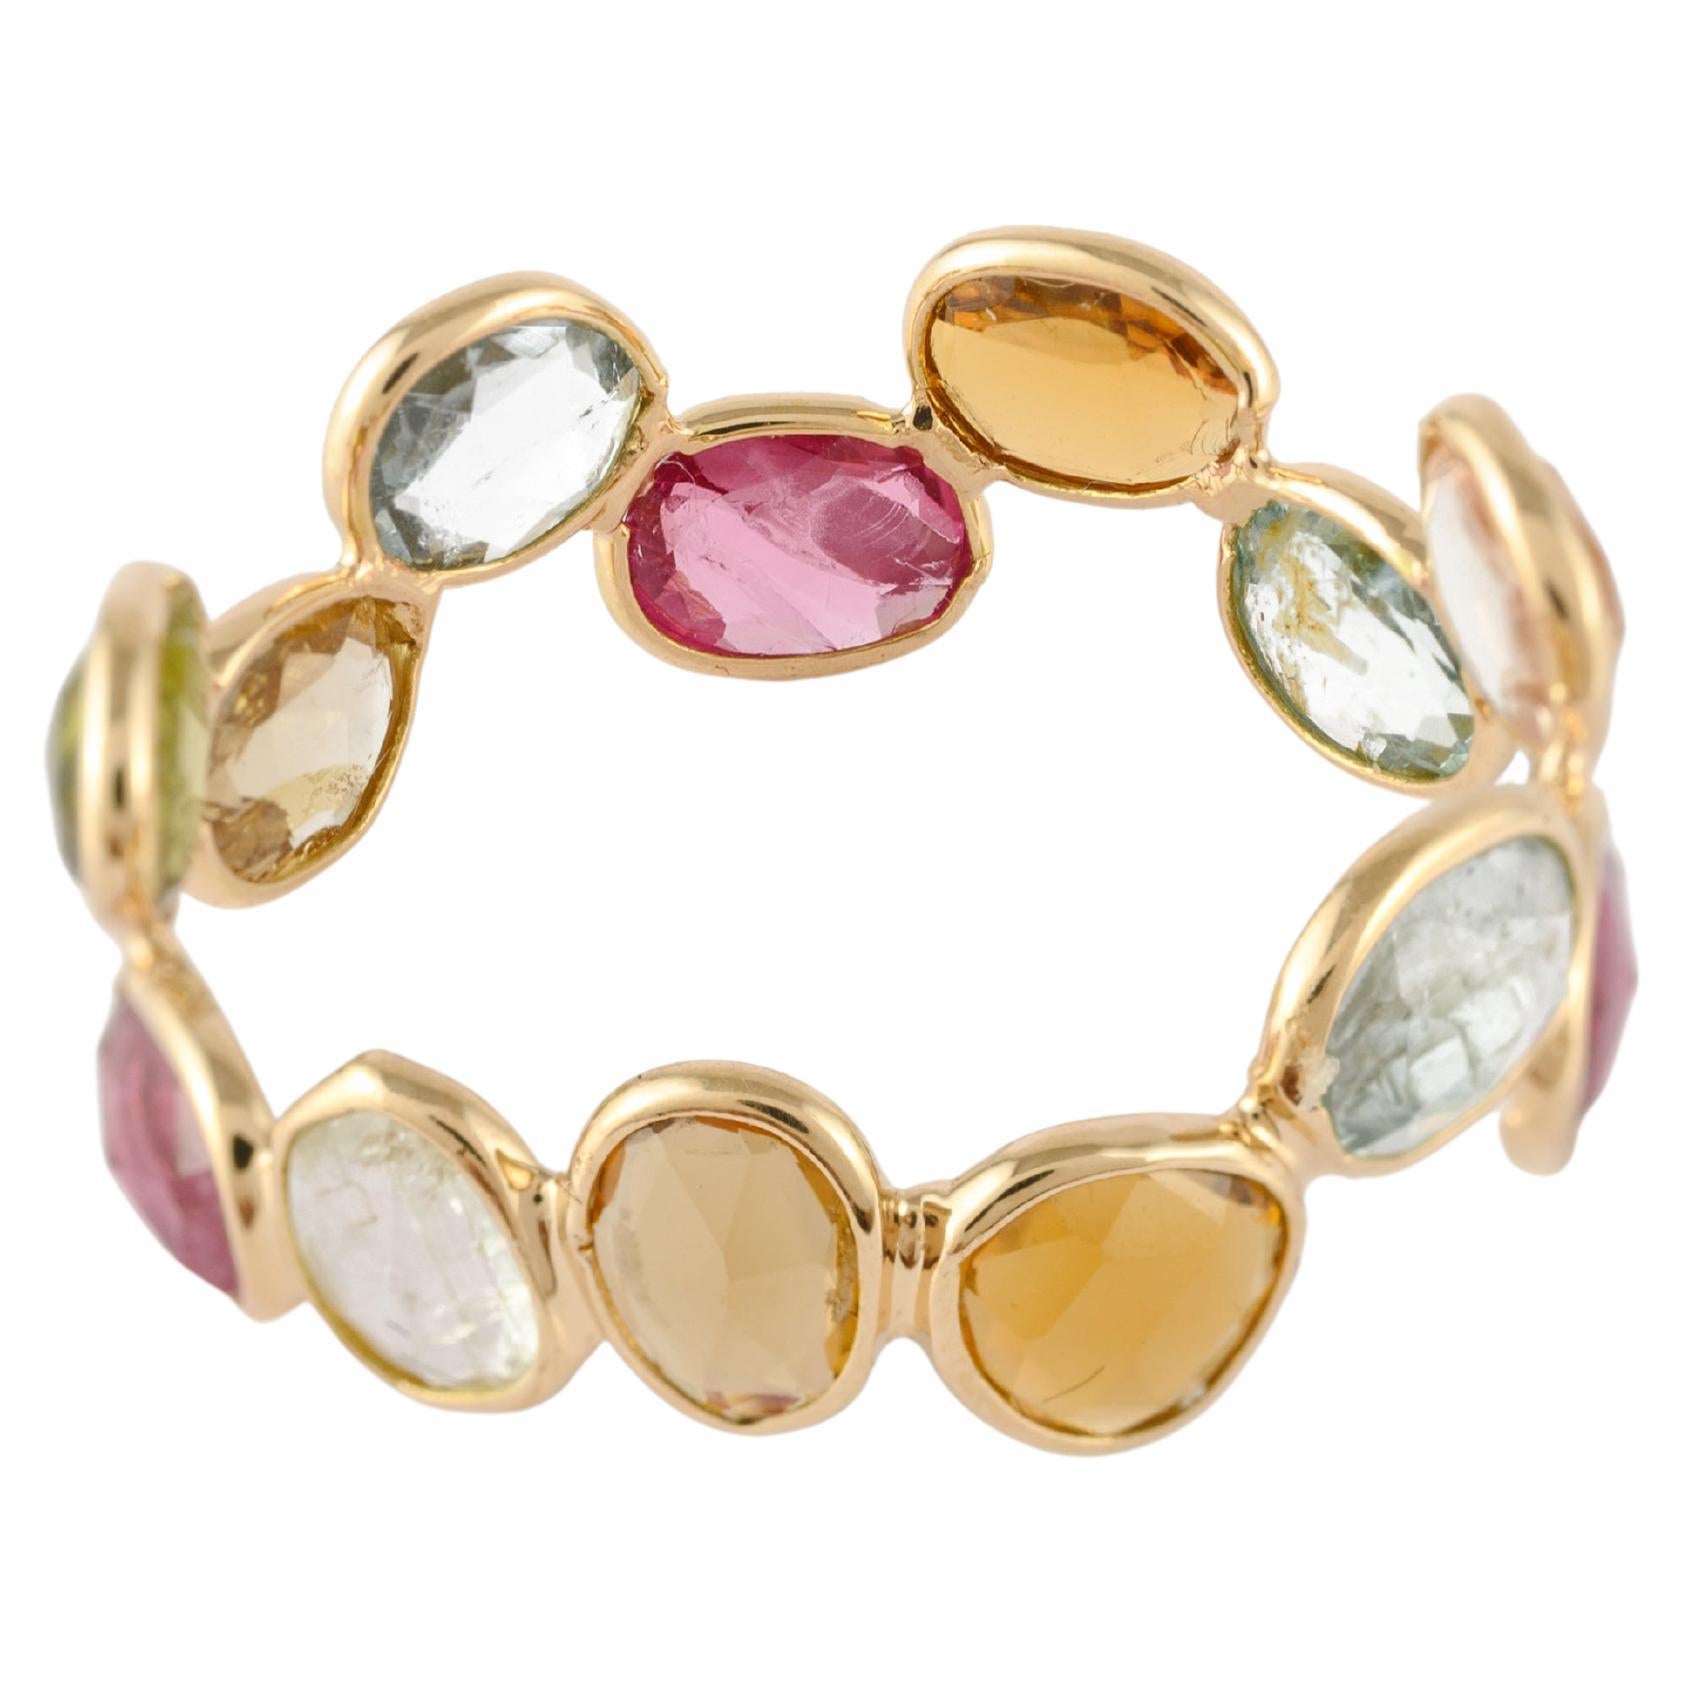 For Sale:  18k Yellow Gold 3.16 Carat Tourmaline Eternity Band Ring